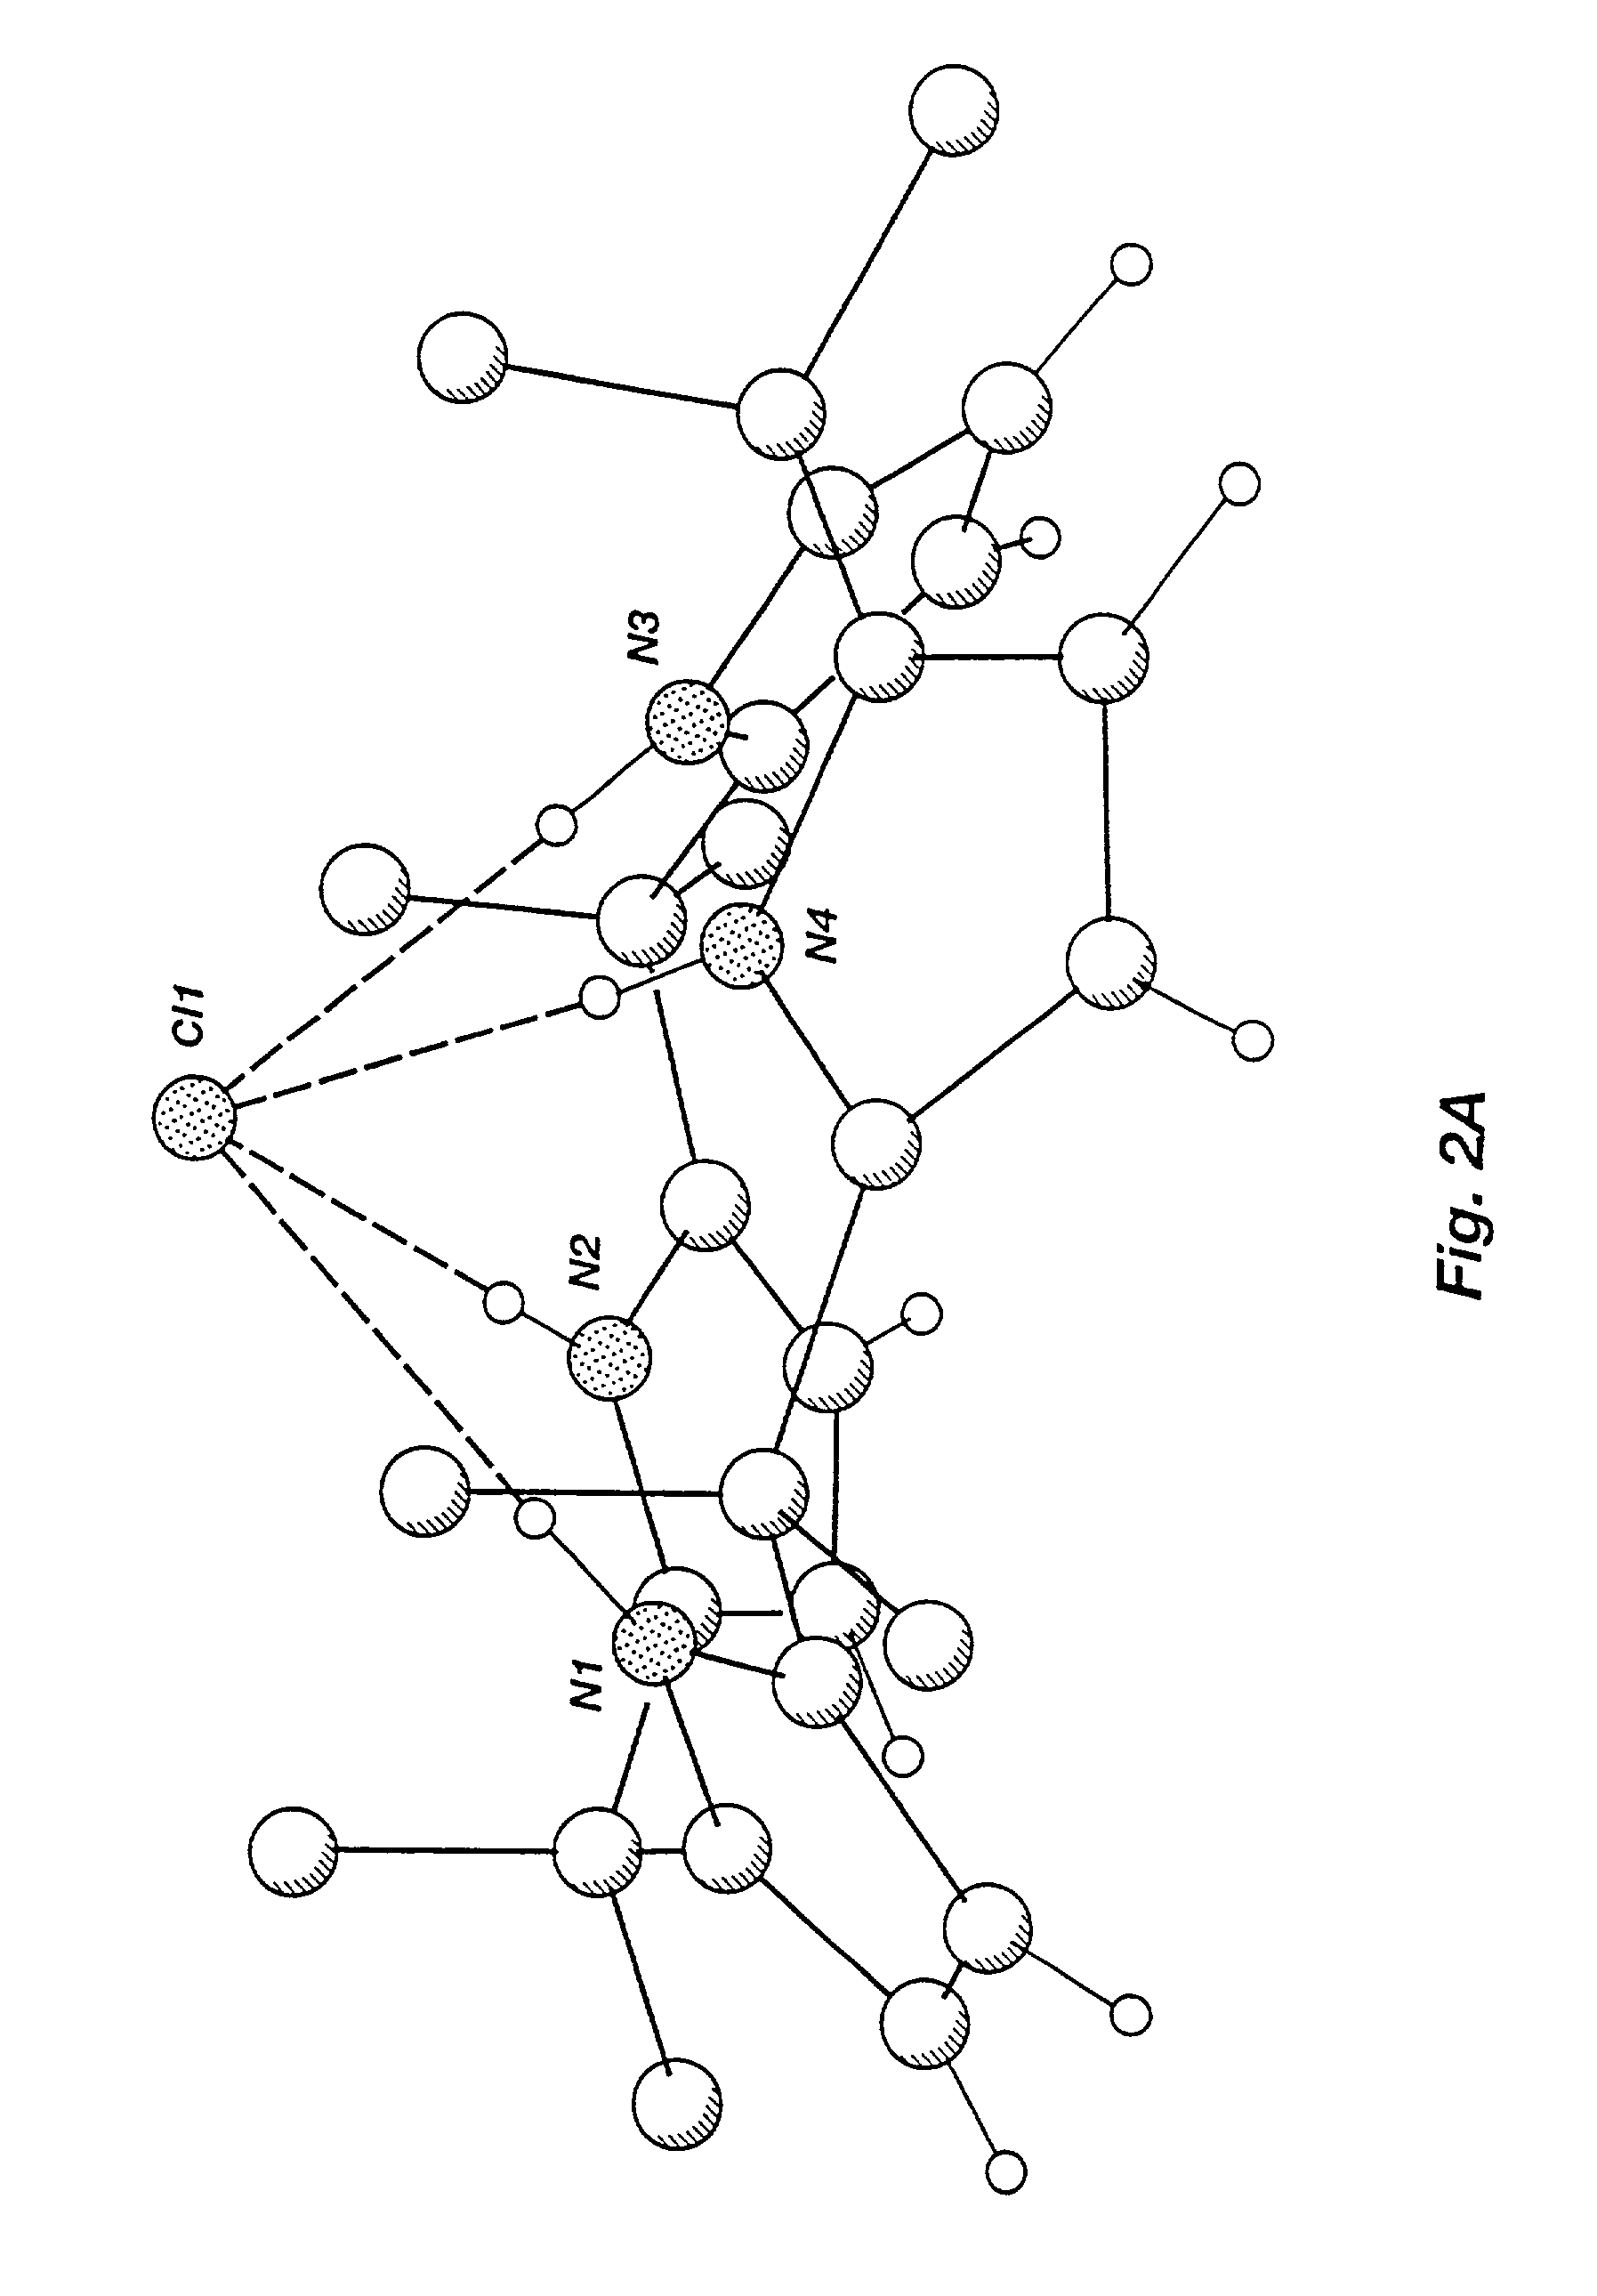 Halogenated calixpyrroles and uses thereof